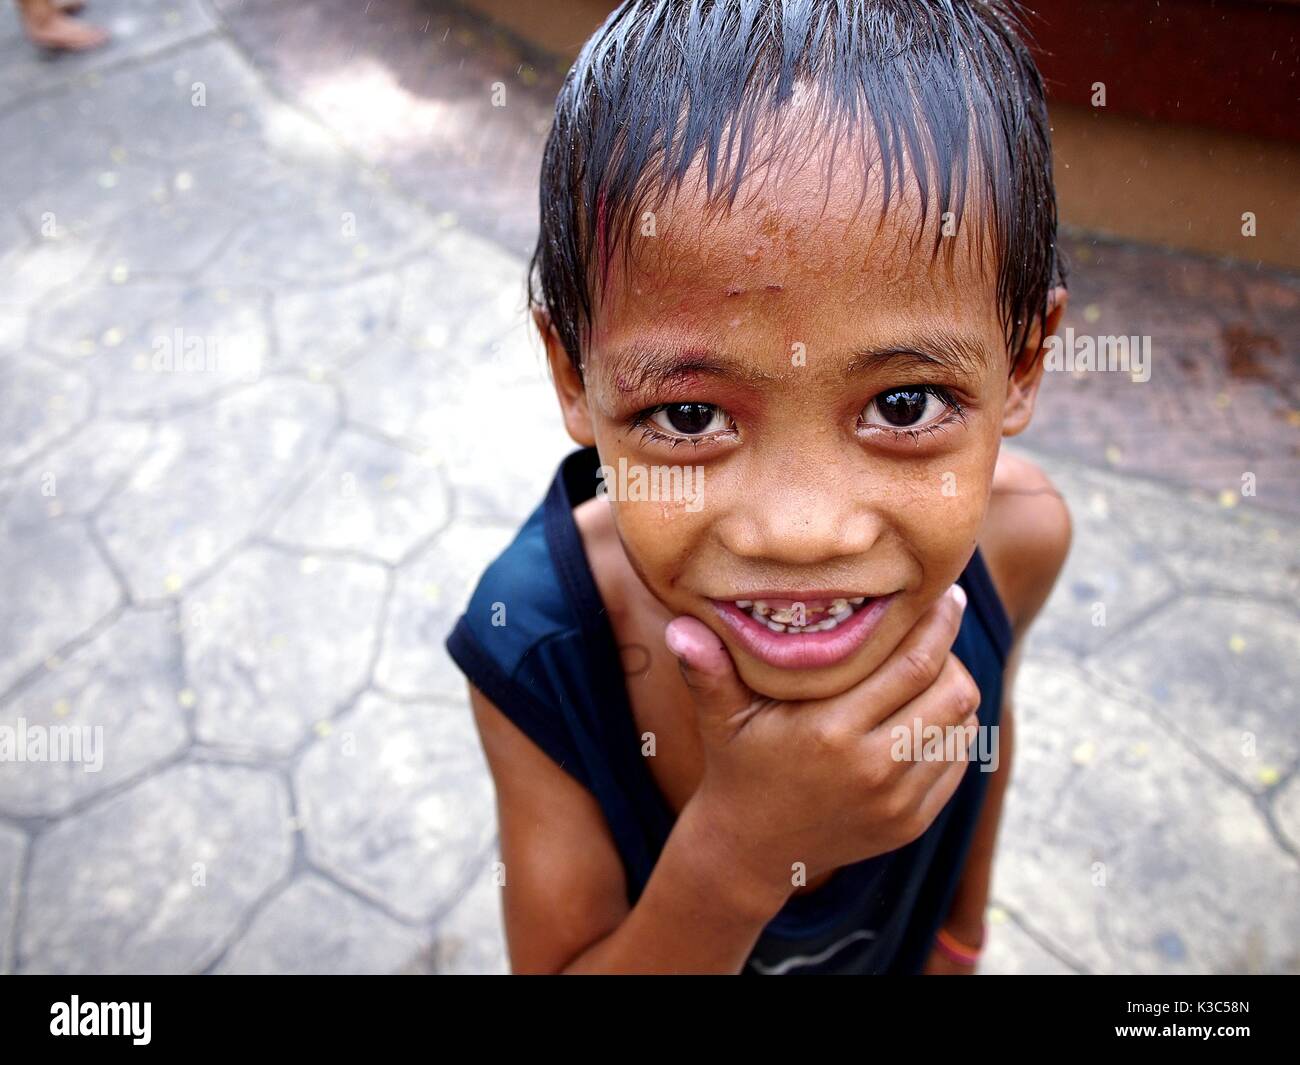 MARIKINA CITY, PHILIPPINES - AUGUST 28, 2017: A young boy smiles for the camera after getting himself wet at a water fountain at an outdoor park. Stock Photo